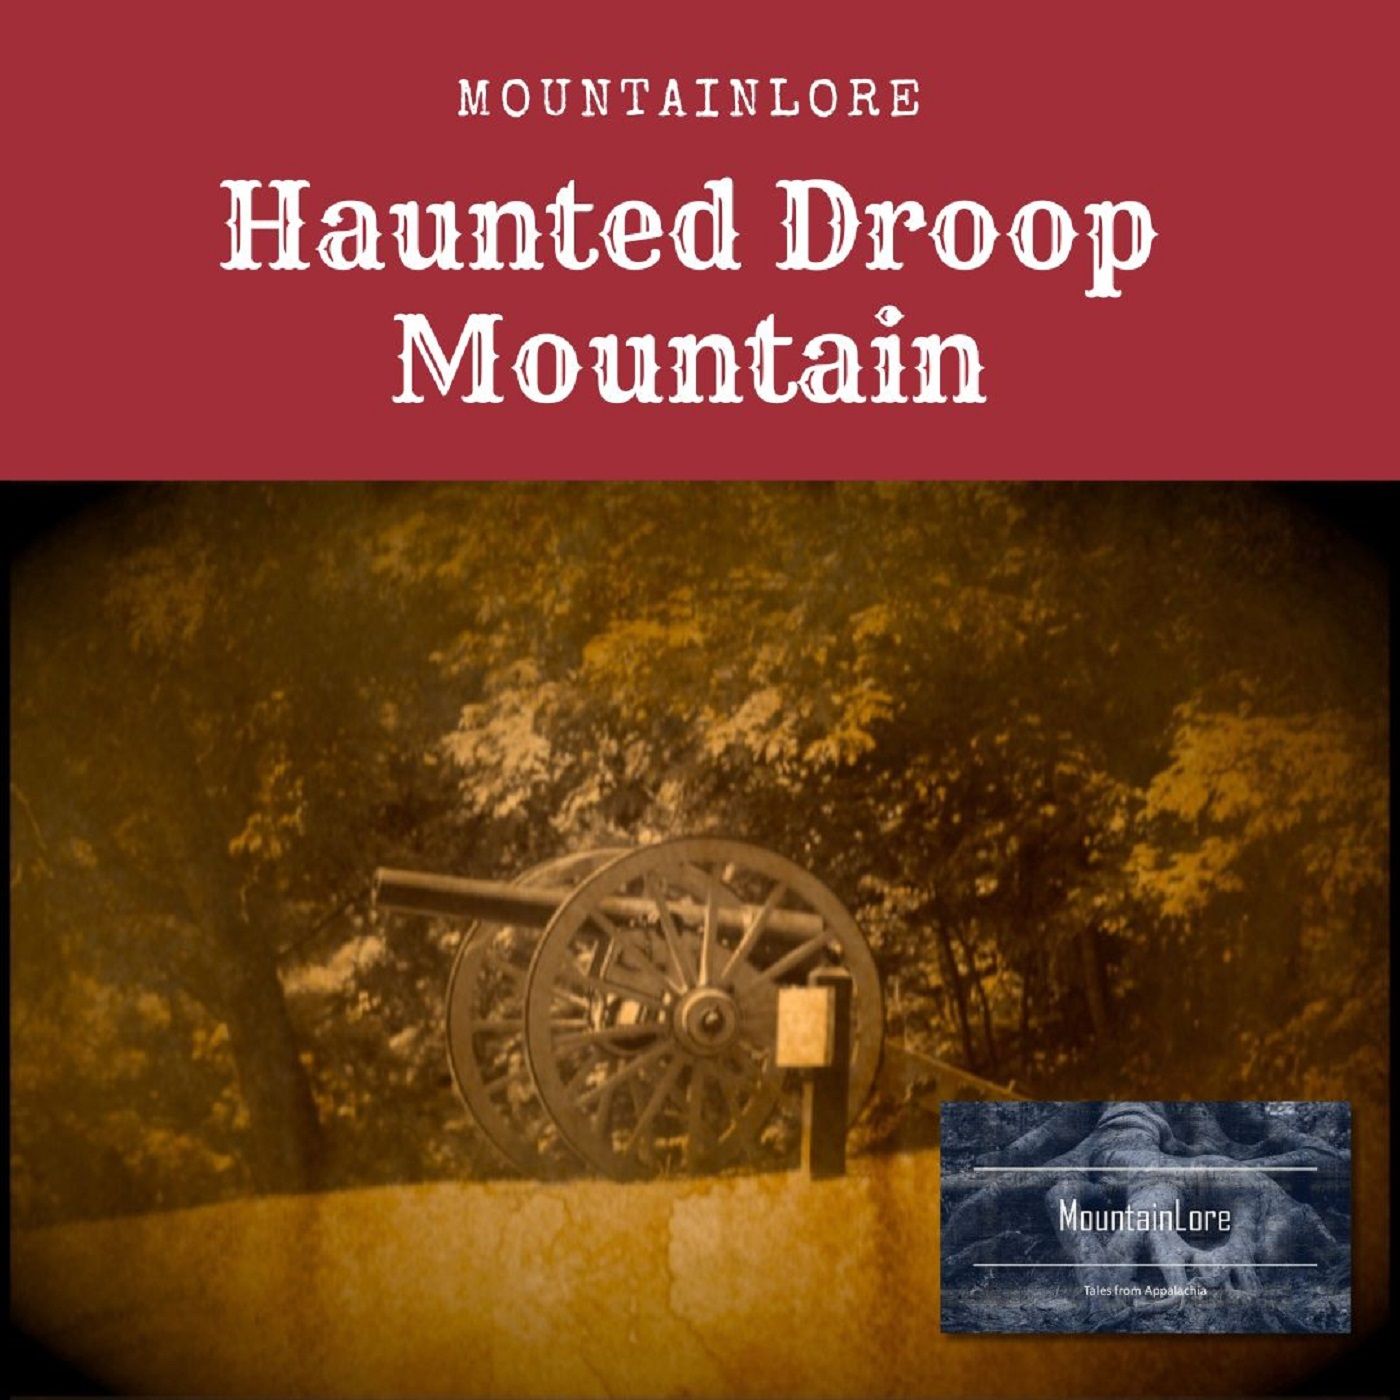 Haunted Droop Mountain